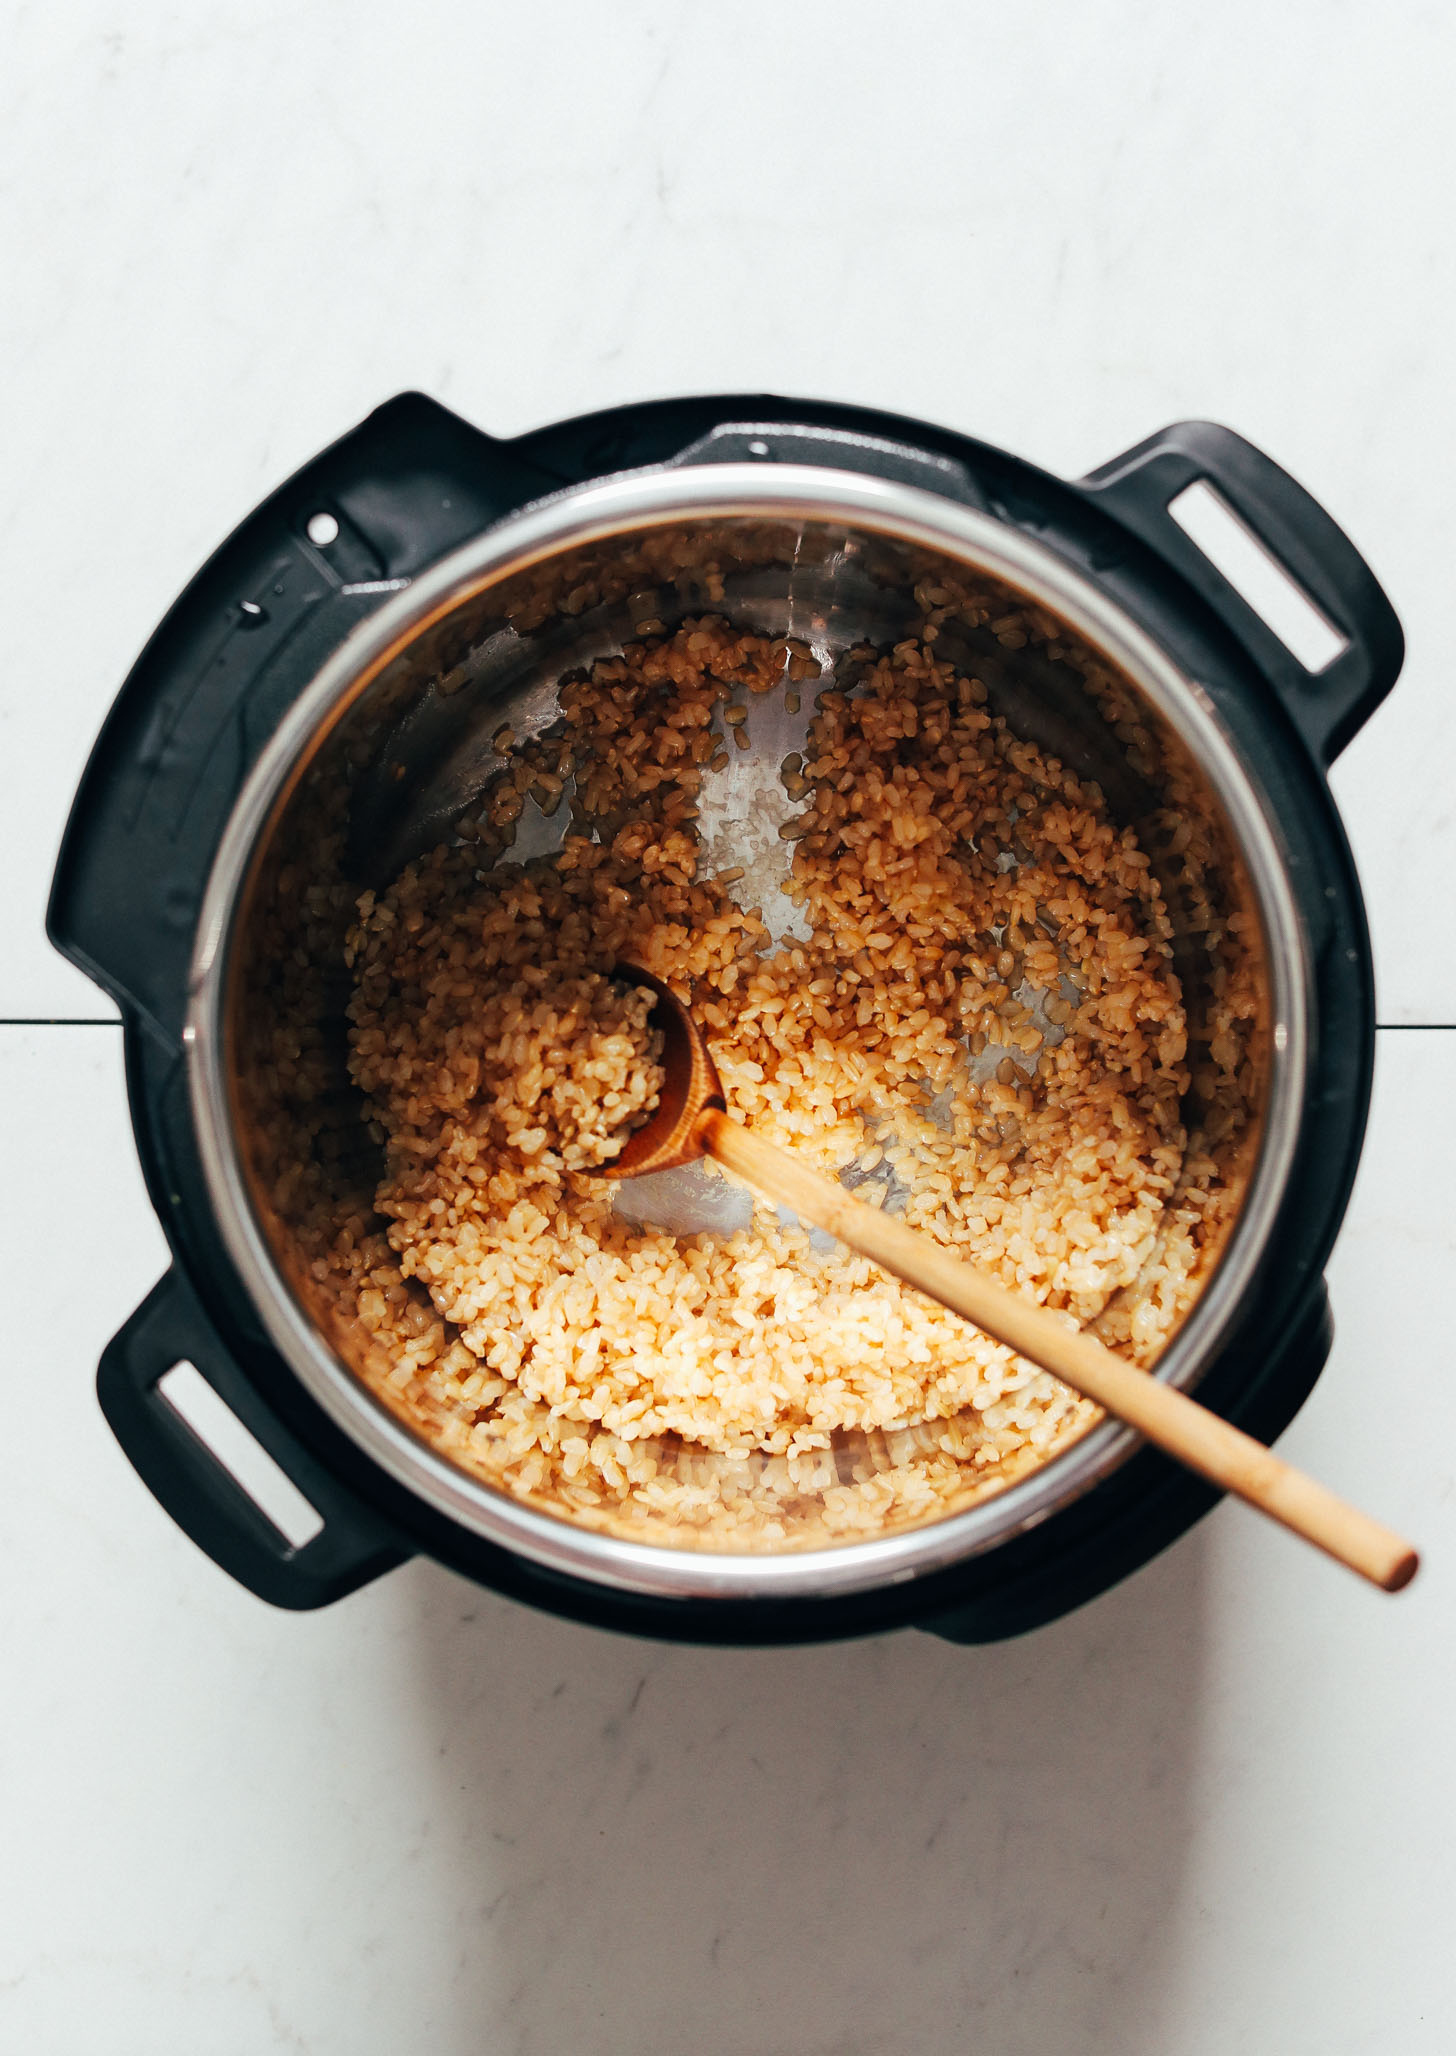 Wooden spoon and perfectly cooked brown rice in an Instant Pot